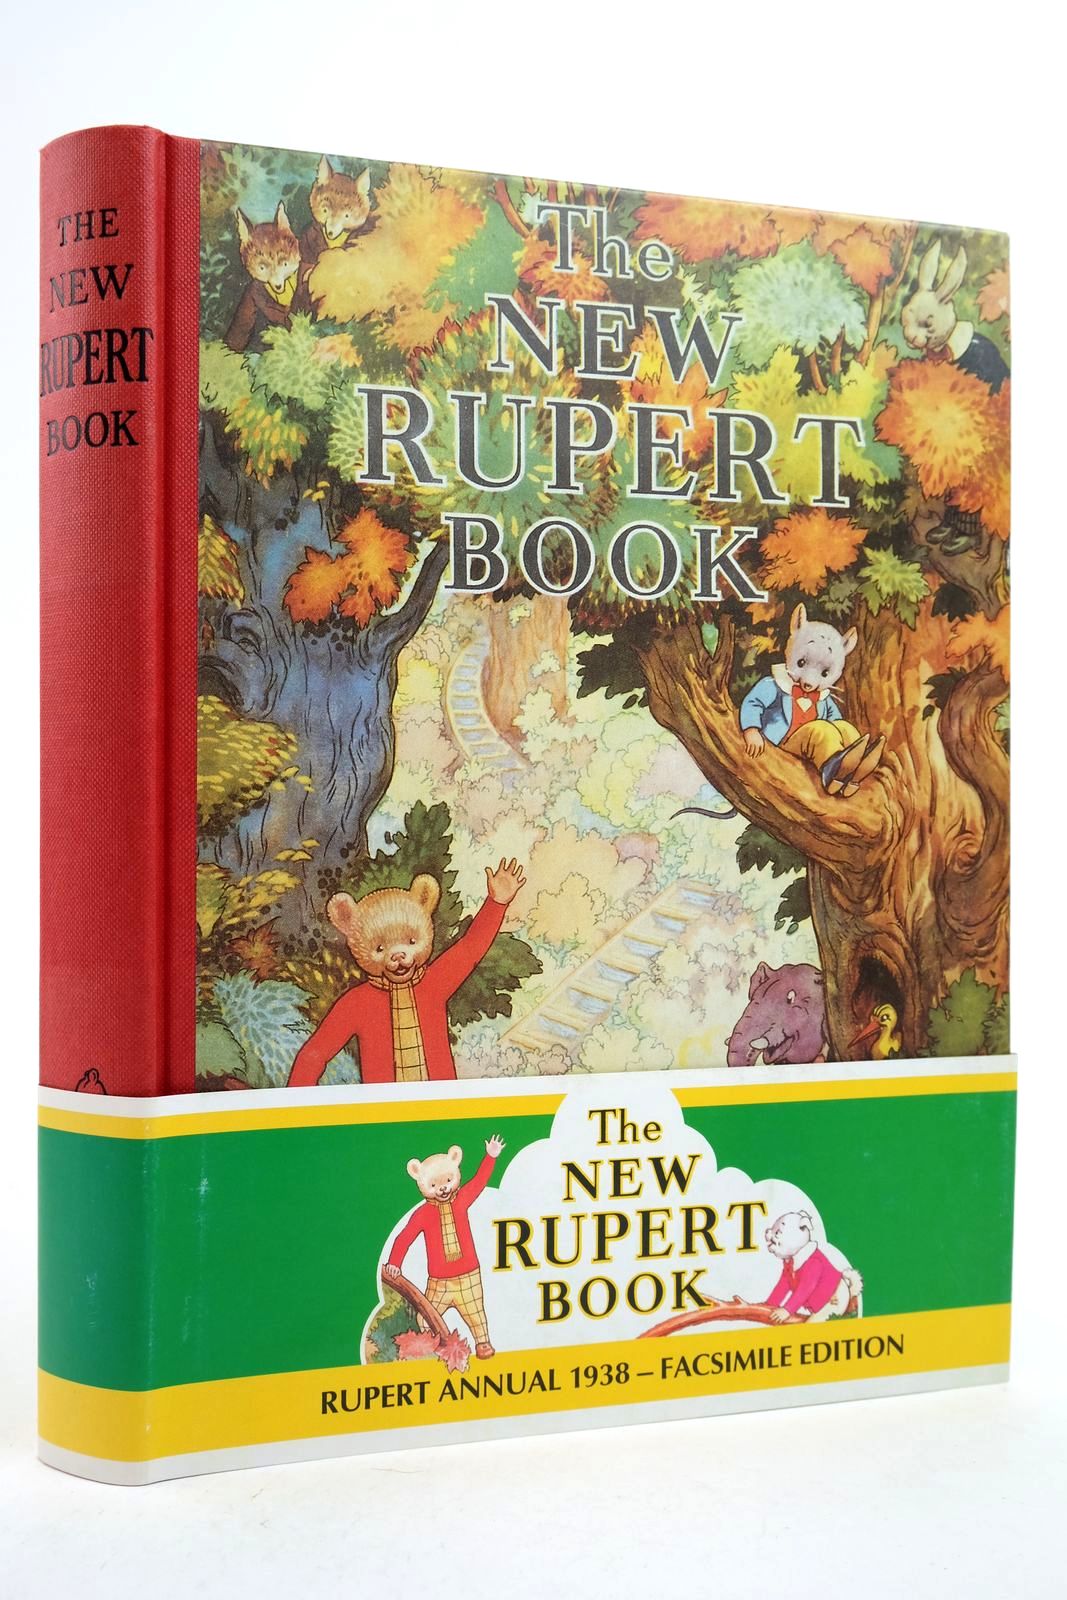 Photo of RUPERT ANNUAL 1938 (FACSIMILE) - THE NEW RUPERT BOOK written by Bestall, Alfred illustrated by Bestall, Alfred published by Daily Express (STOCK CODE: 2139409)  for sale by Stella & Rose's Books